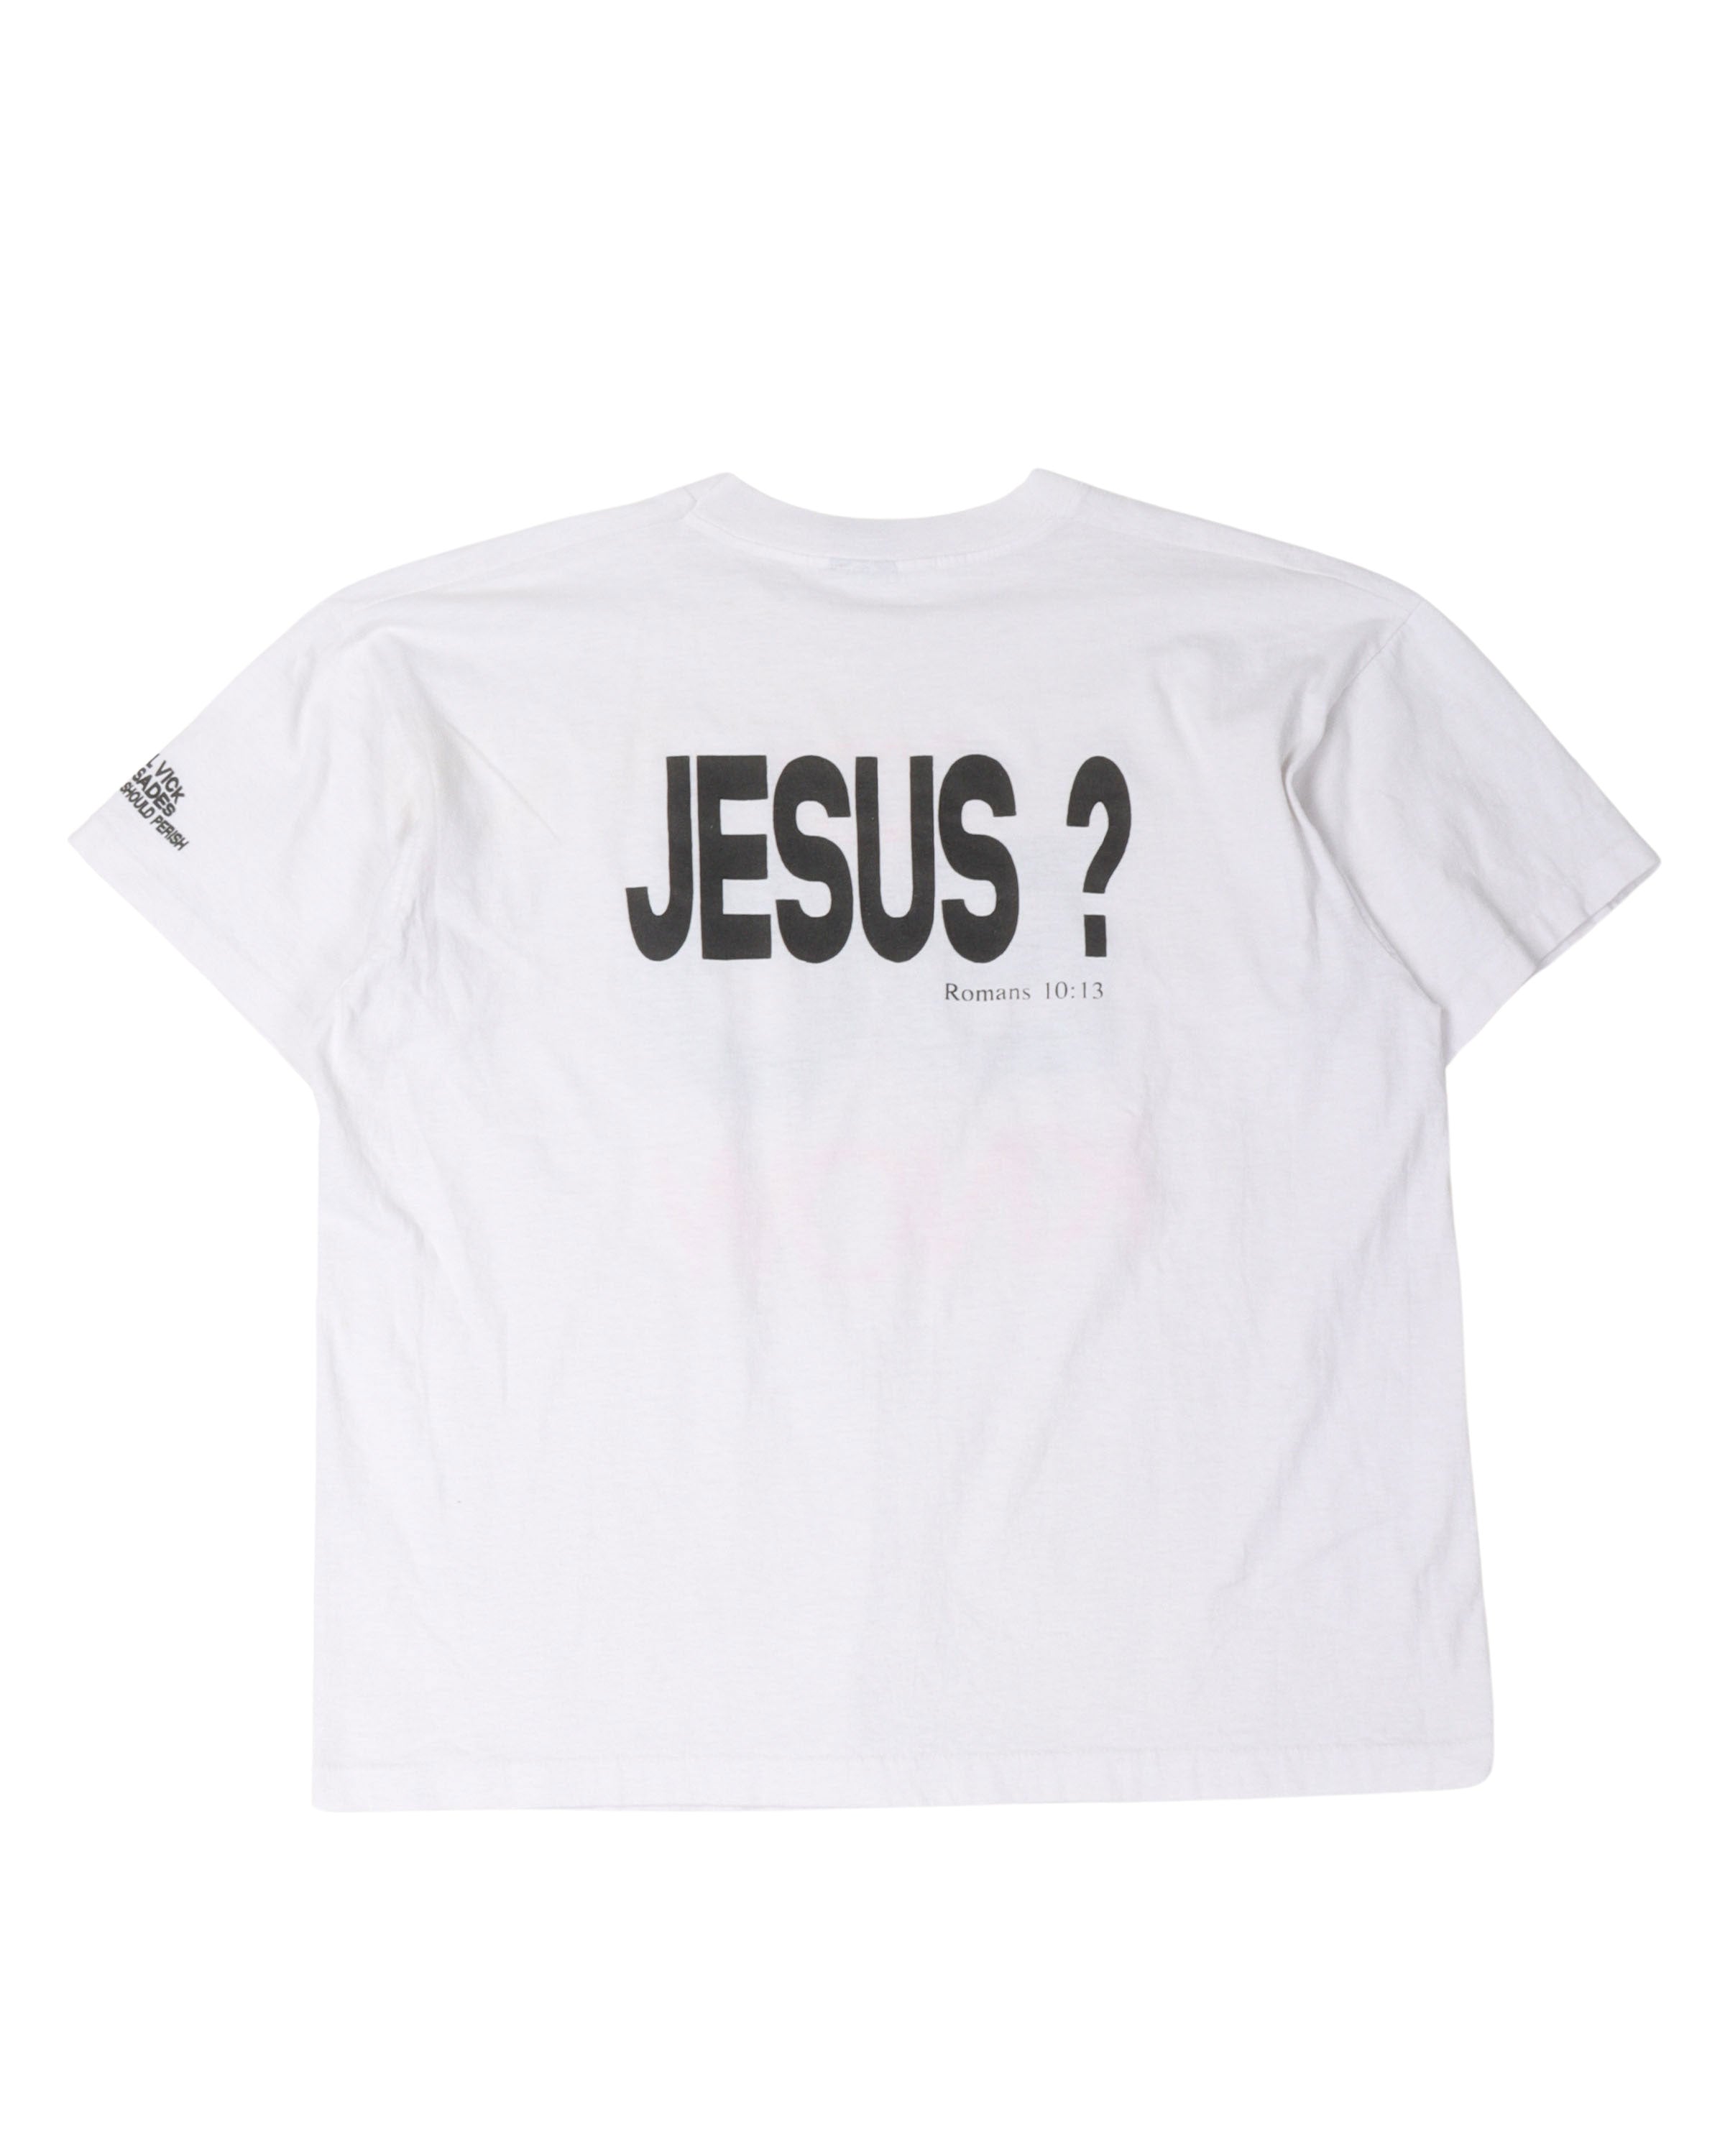 "Does Bo Know Jesus?" T-Shirt